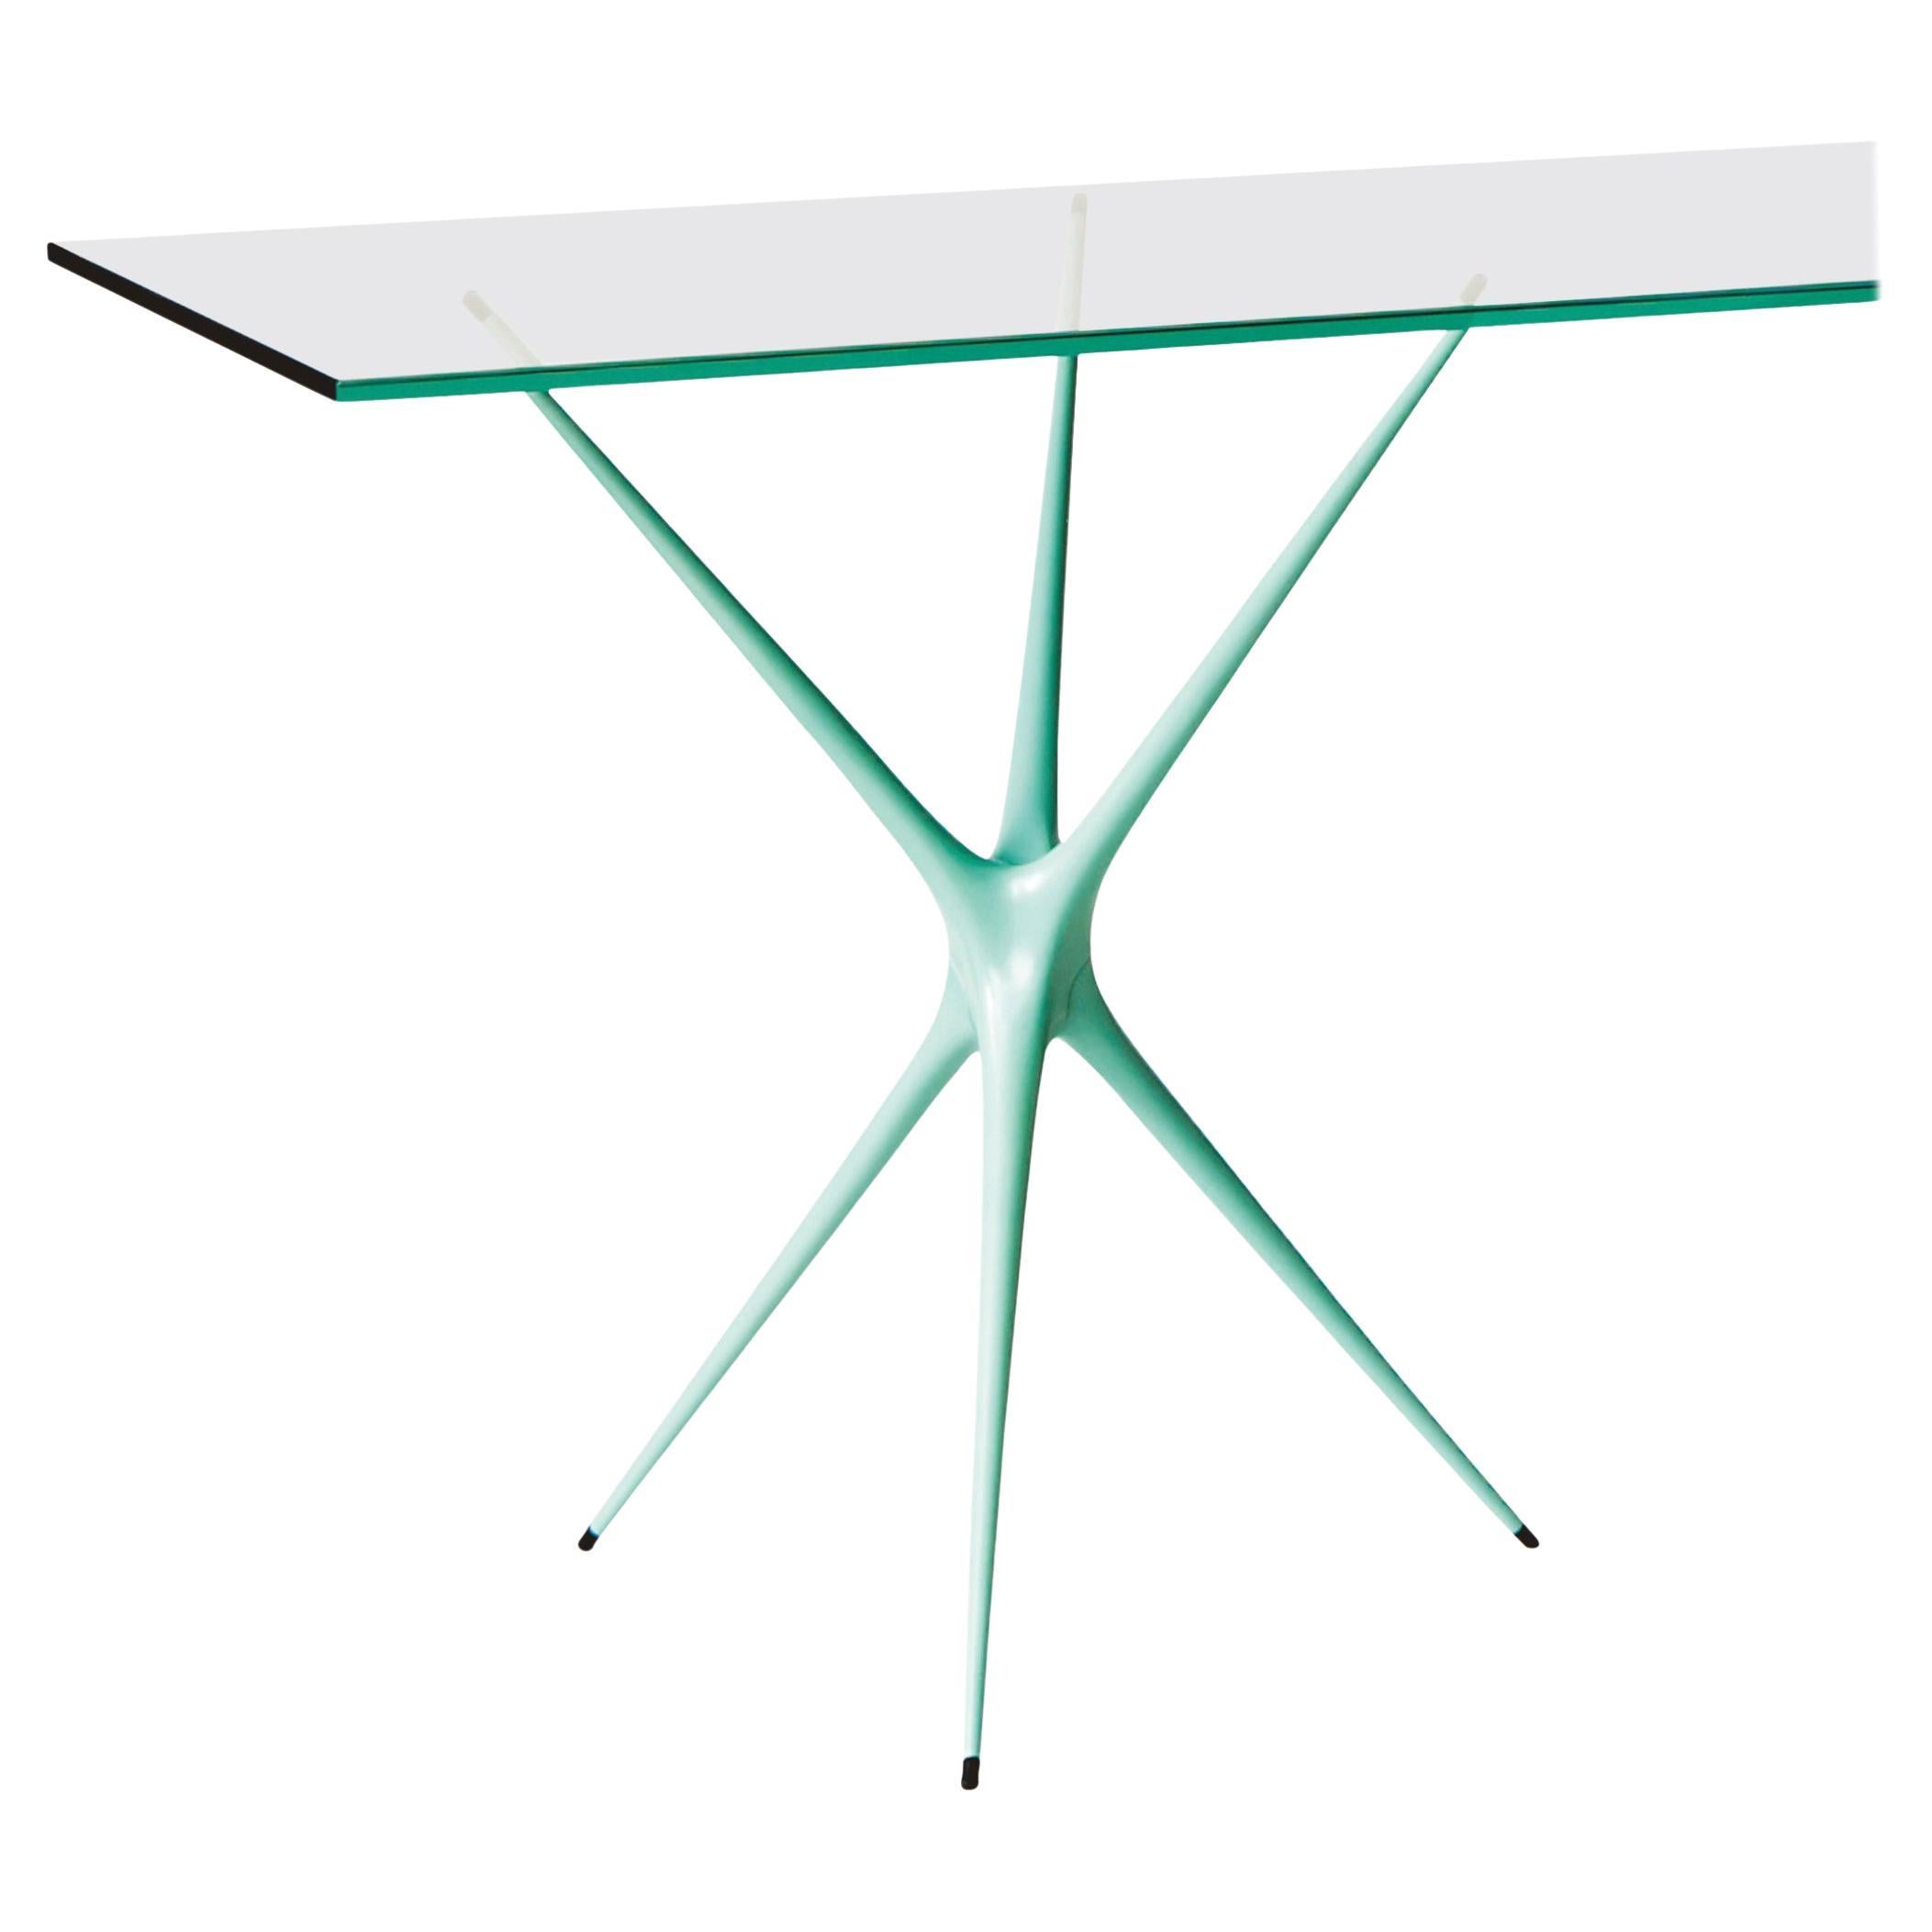 Supernova, Recycled Cast Aluminum Table Leg in Seagreen by Made in Ratio